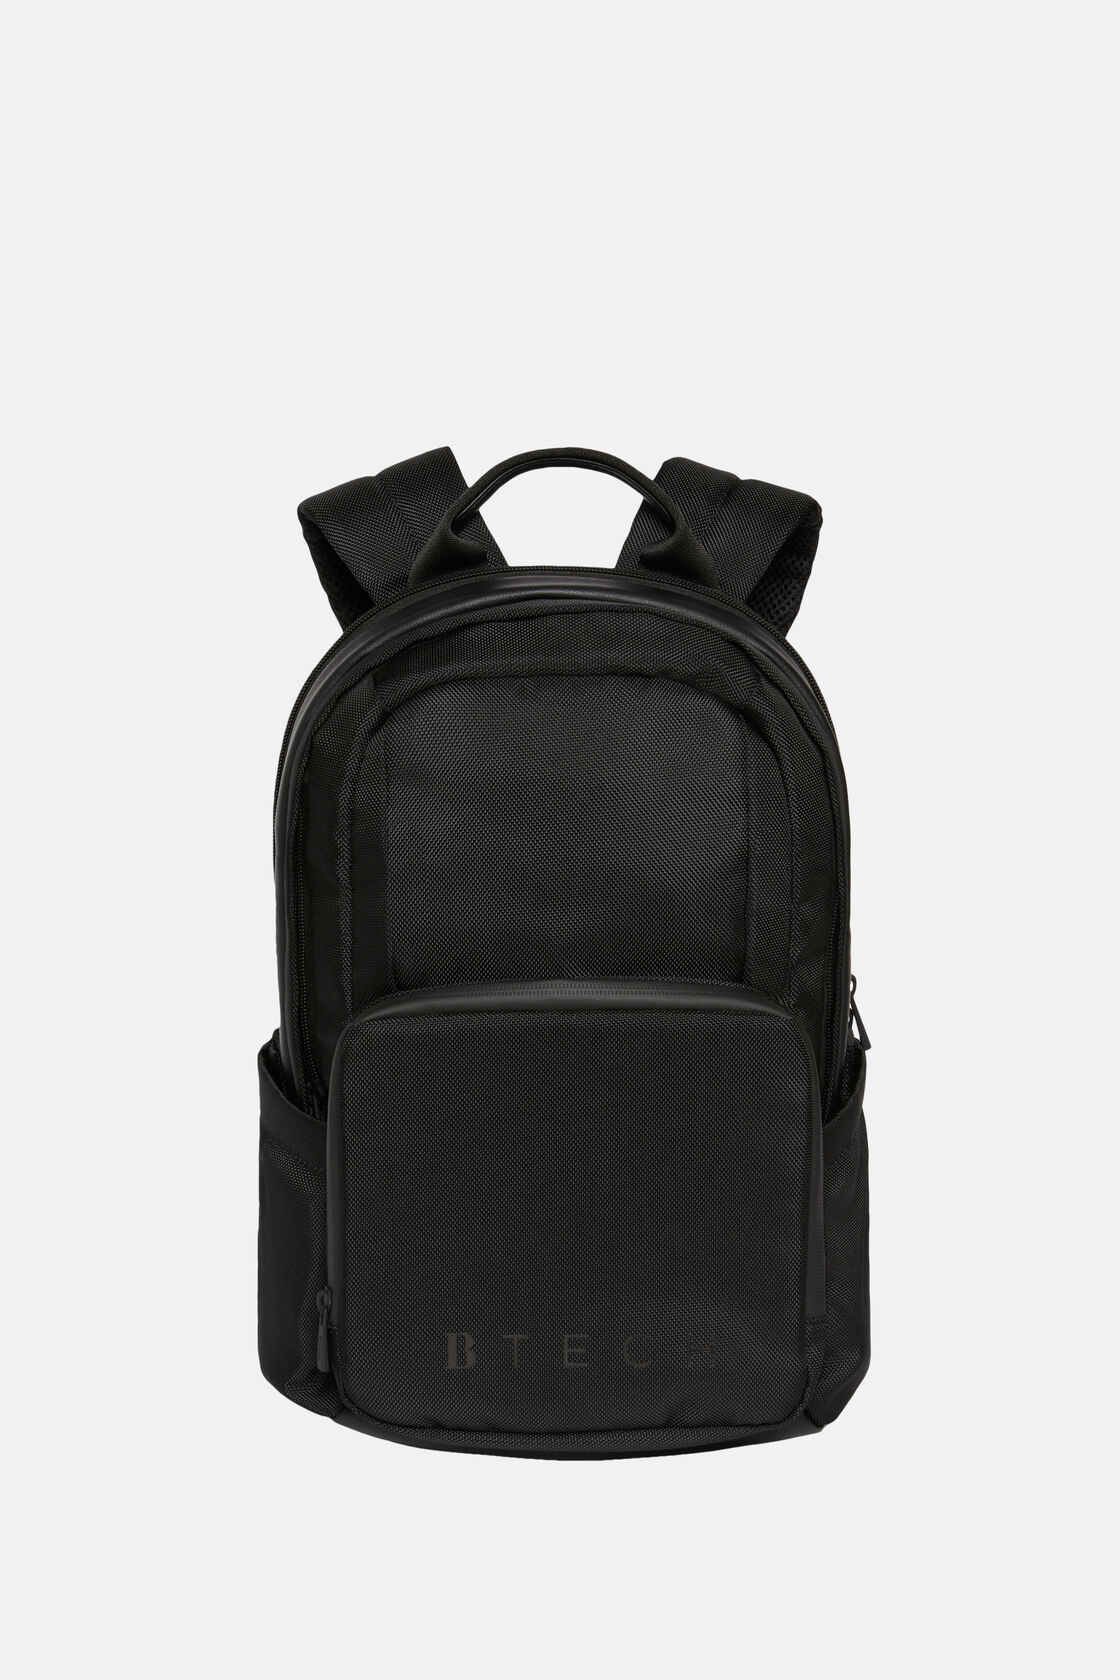 Black Recycled Technical Fabric Rucksack, , hi-res